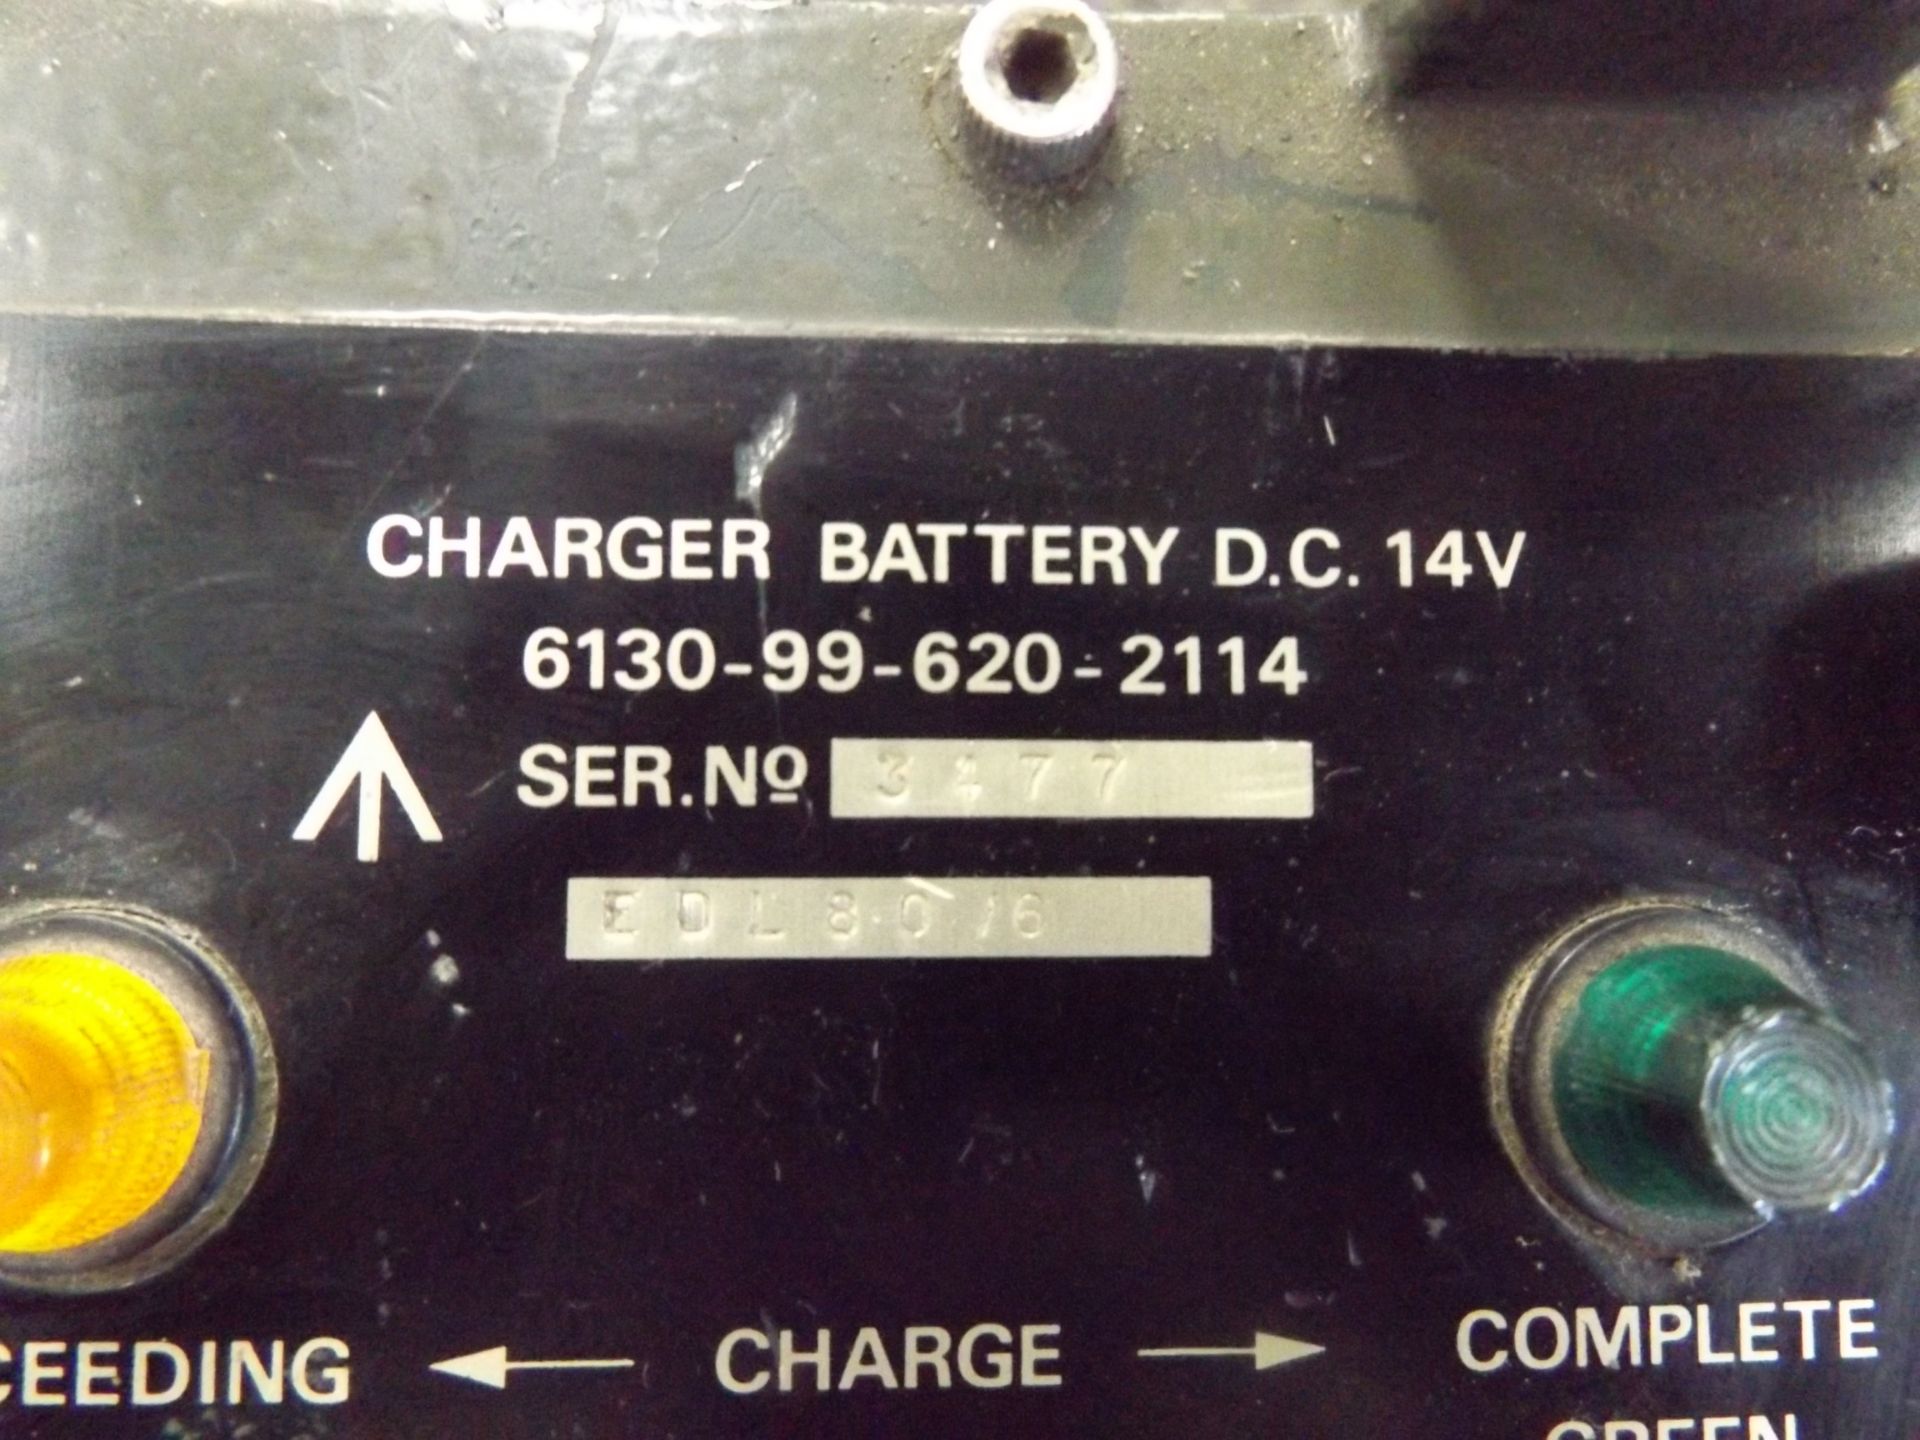 2 x Clansman D.C. 28V Battery Chargers - Image 3 of 3